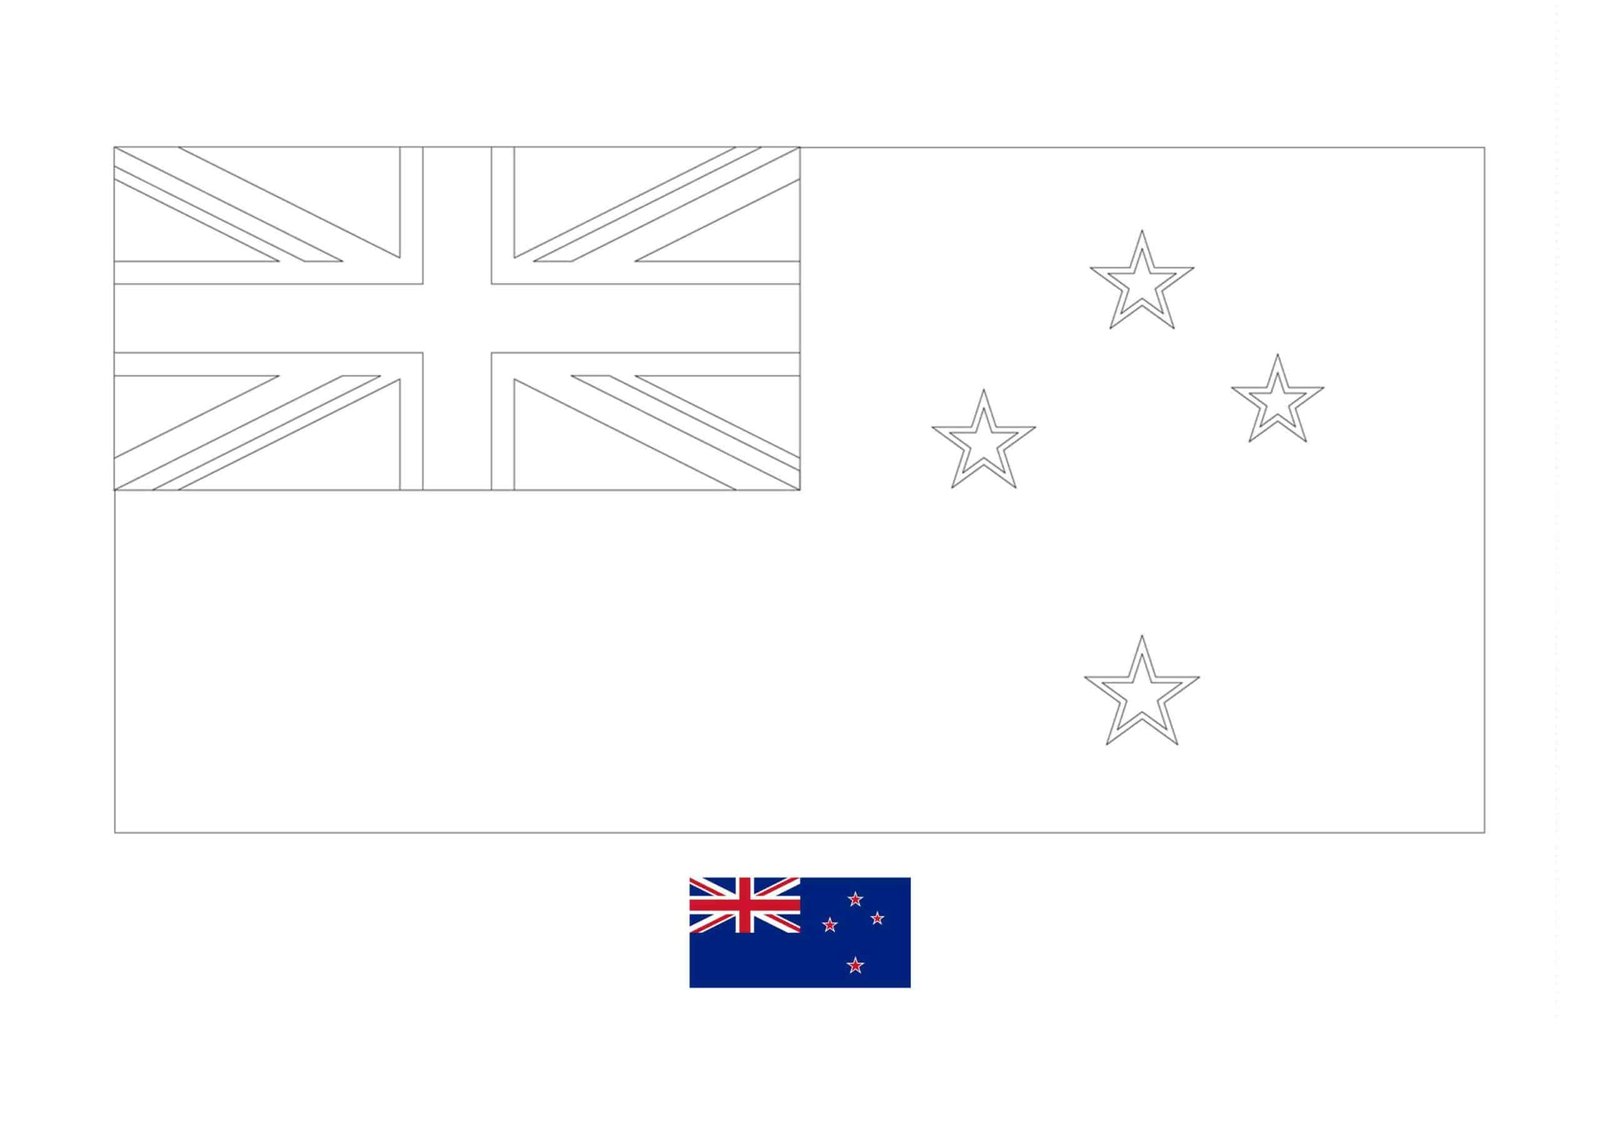 New Zealand flag coloring page with a sample